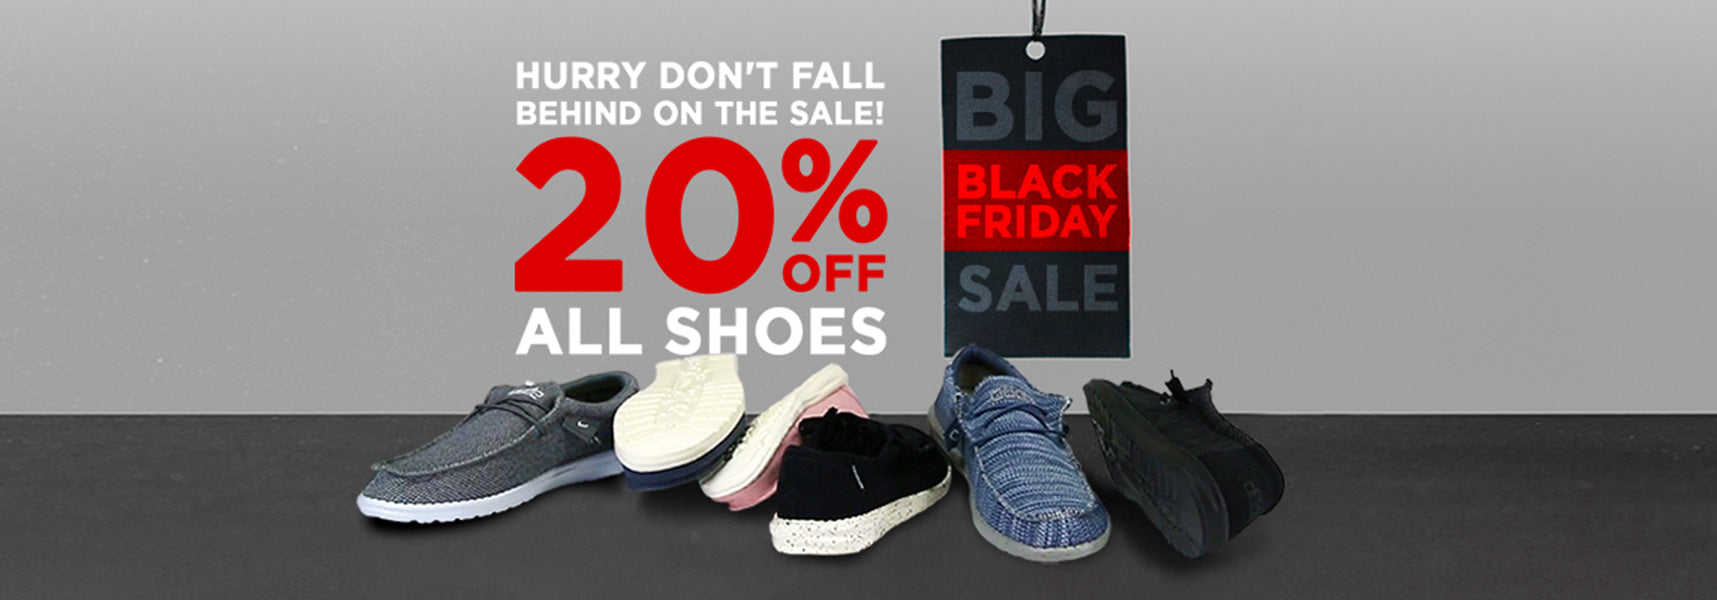 dude shoes black friday